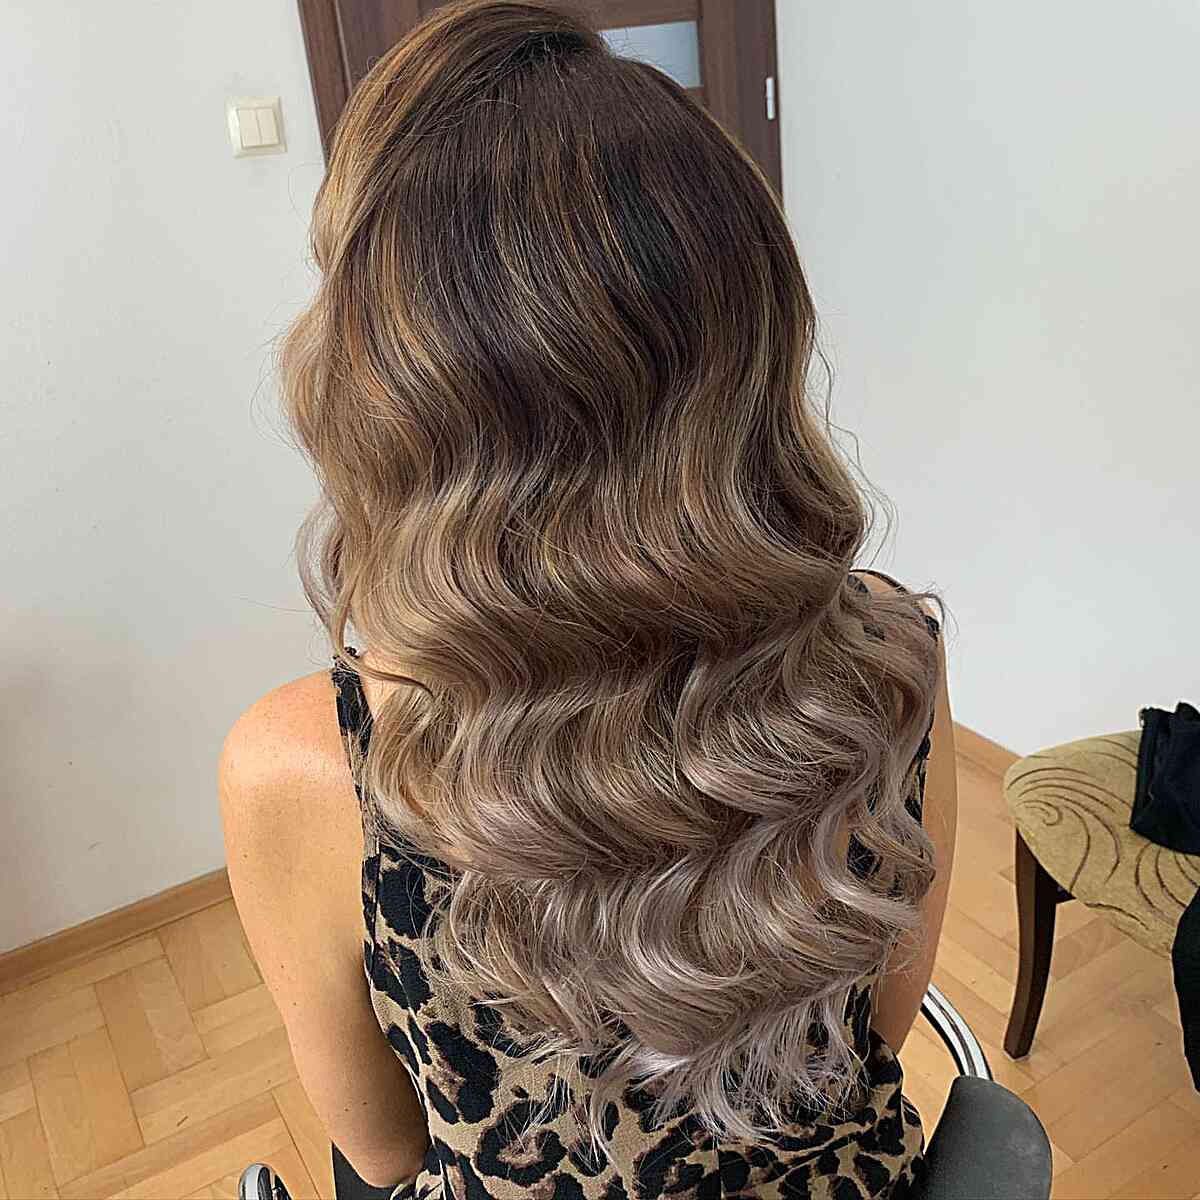 Long Classic Ash Ombre Wavy Hollywood Hair